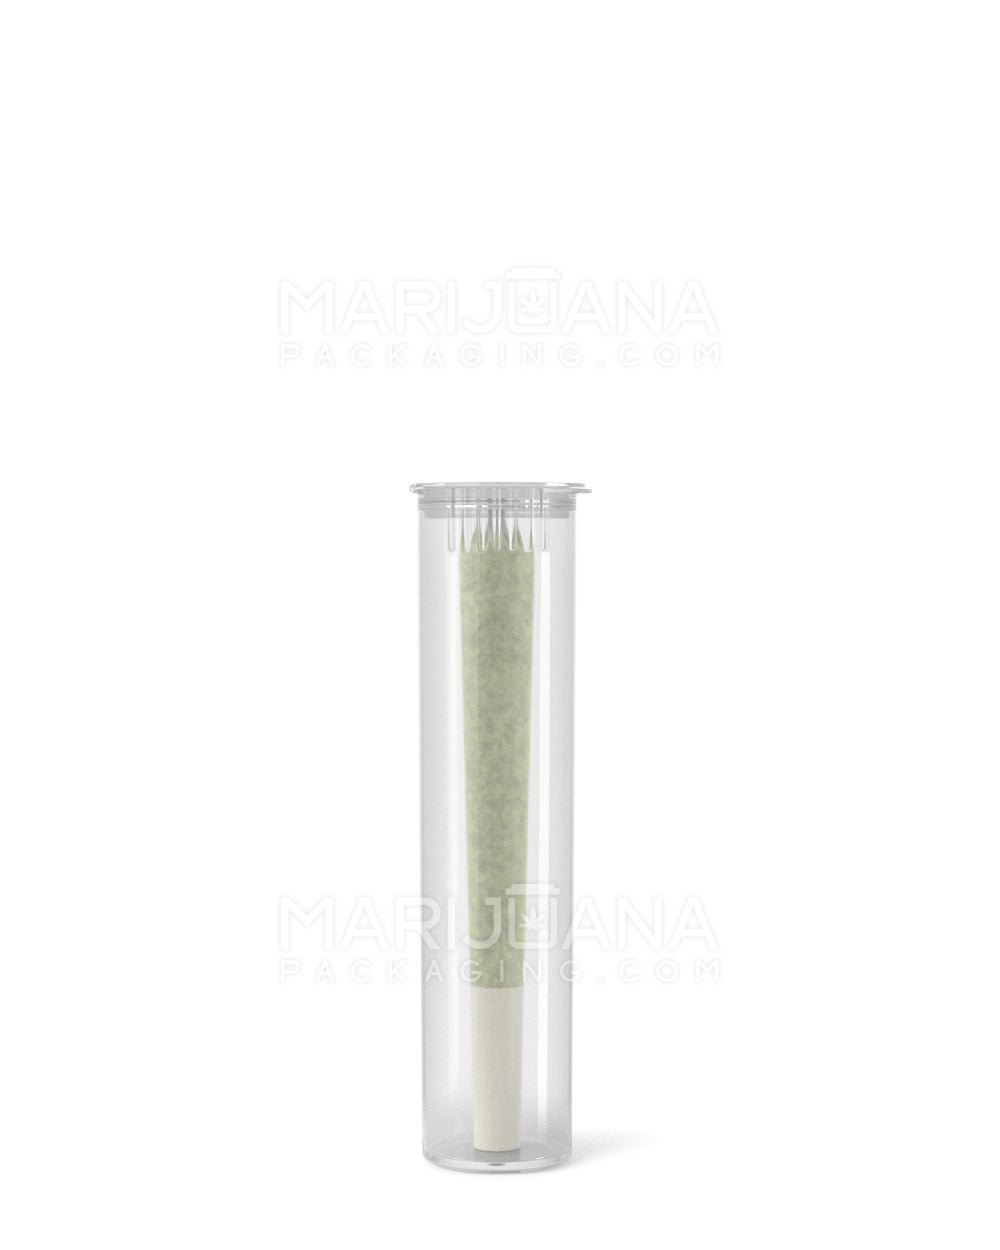 Child Resistant | Pop Top Plastic Pre-Roll Tubes | 80mm - Clear - 1000 Count - 9